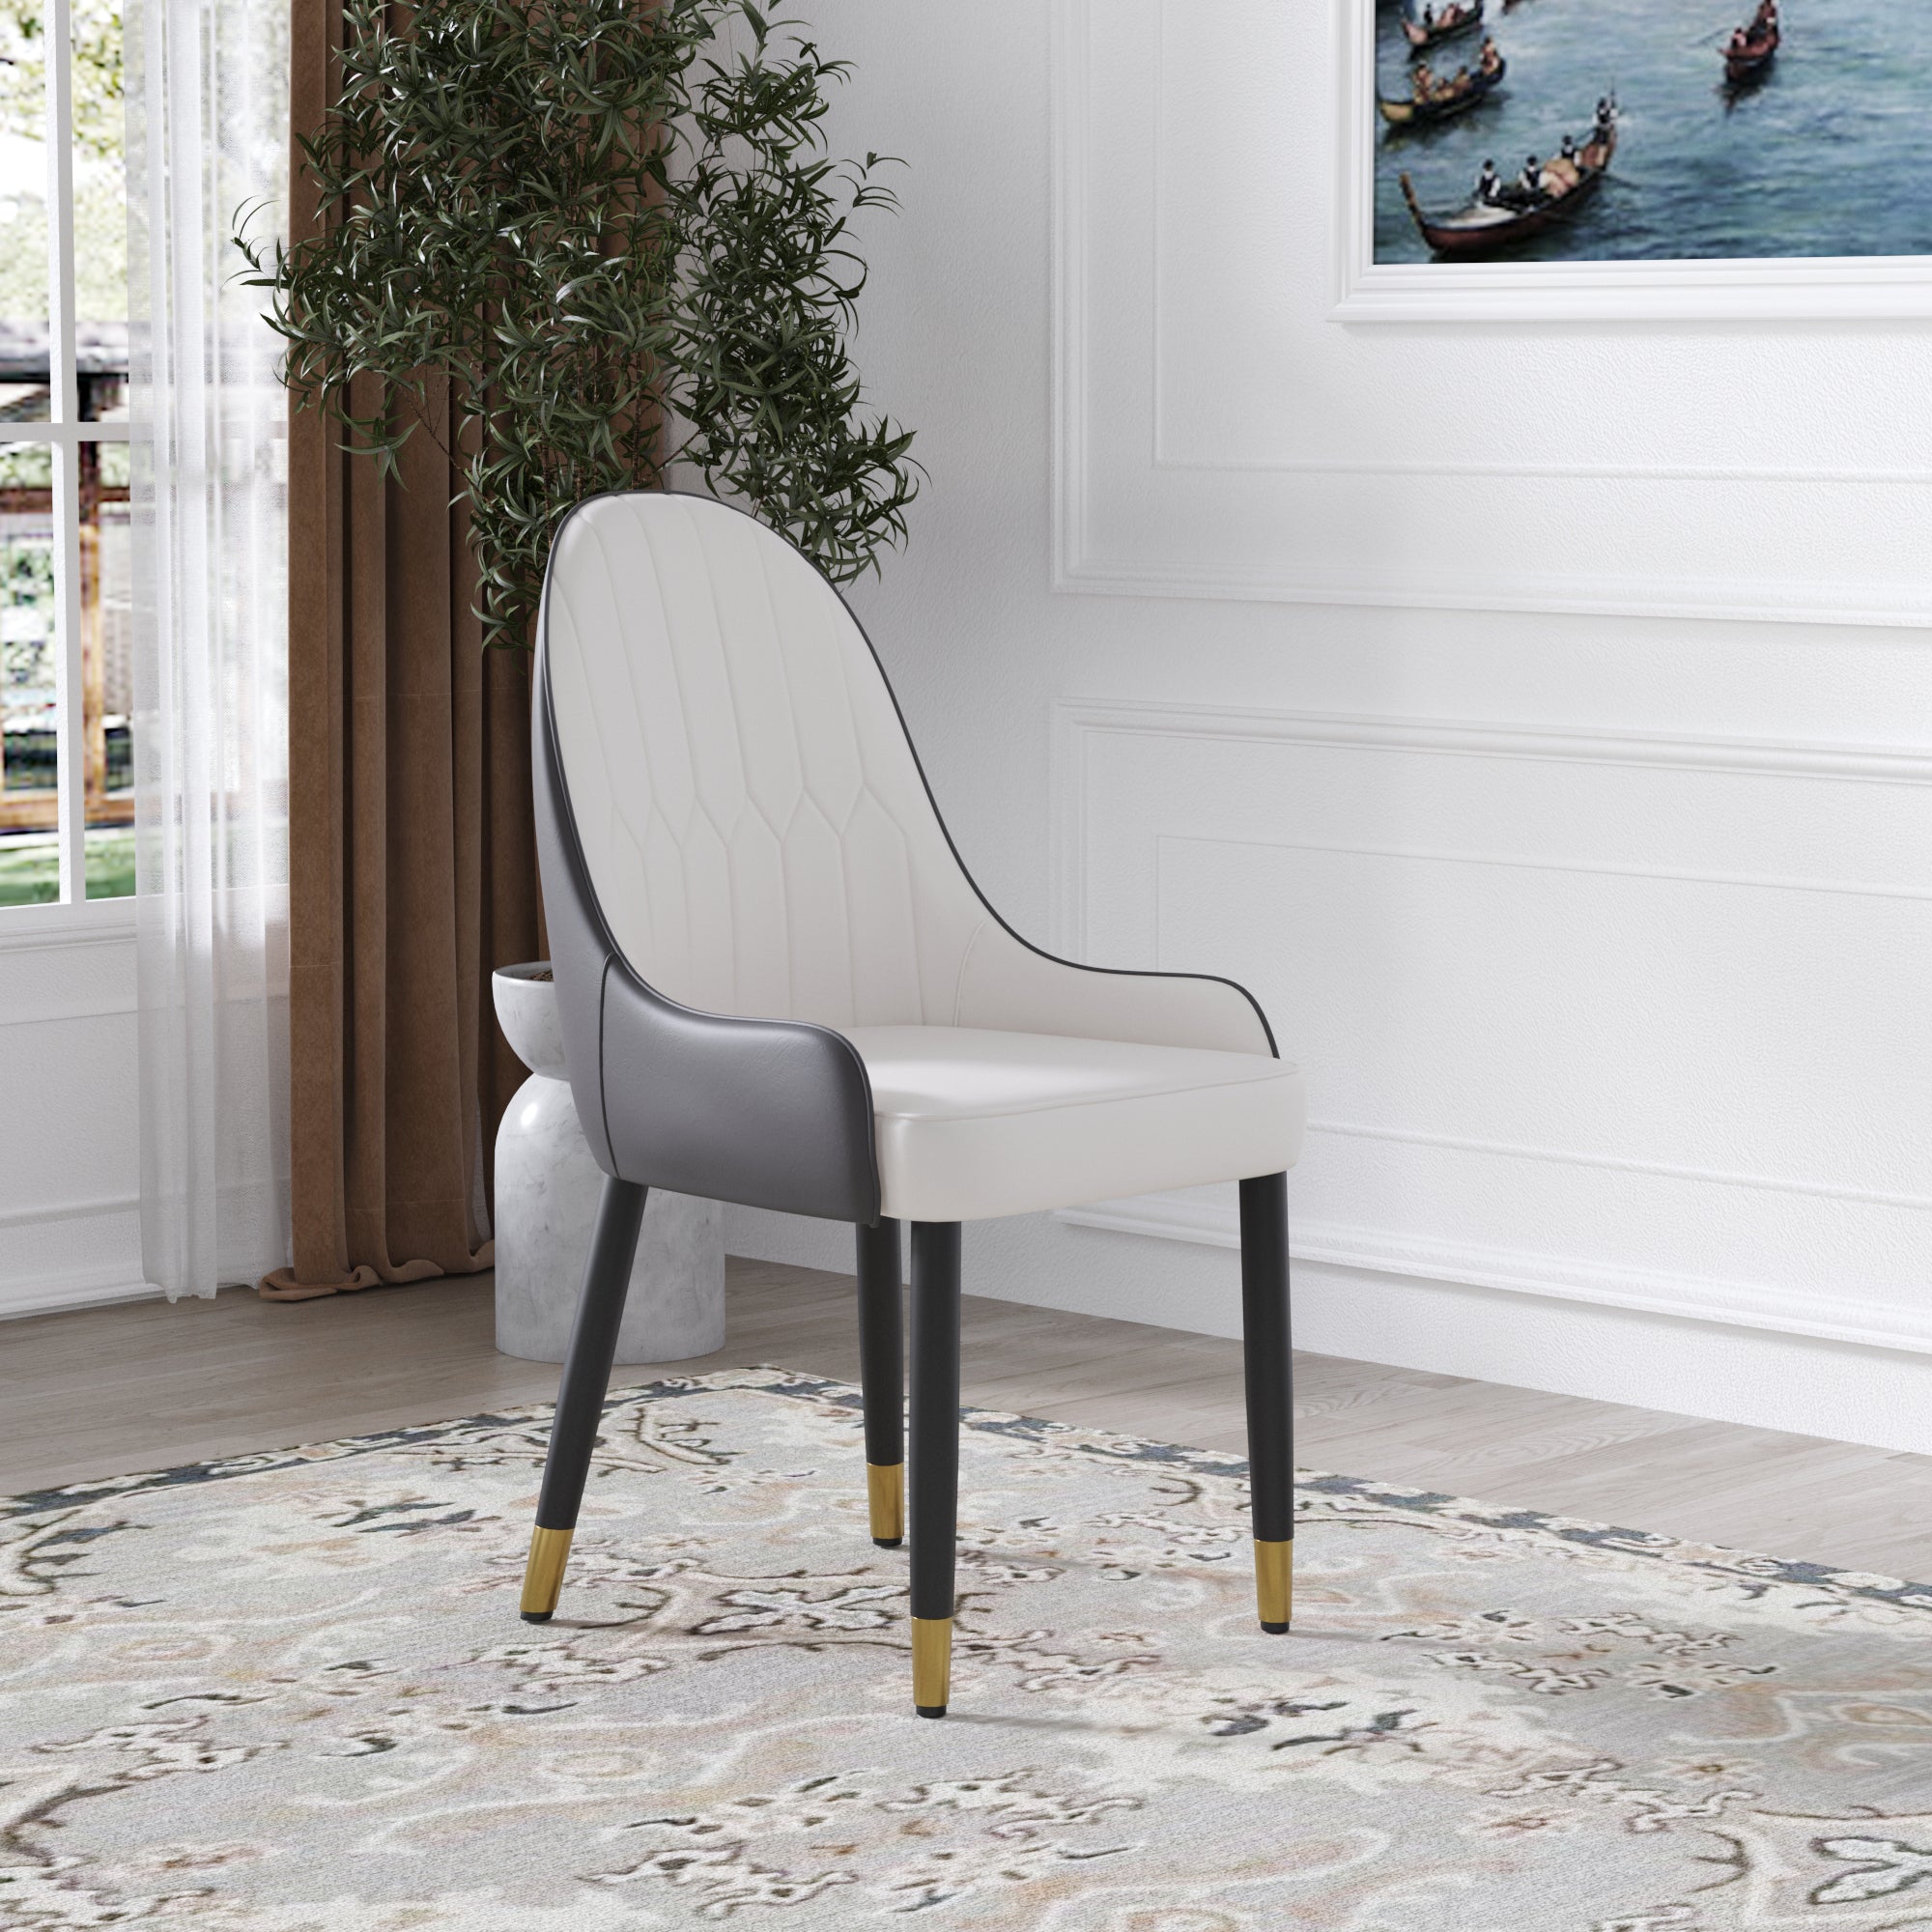 Modern Solid Wood Metal Legs Dining Chairs (Set of 2) - White and Black